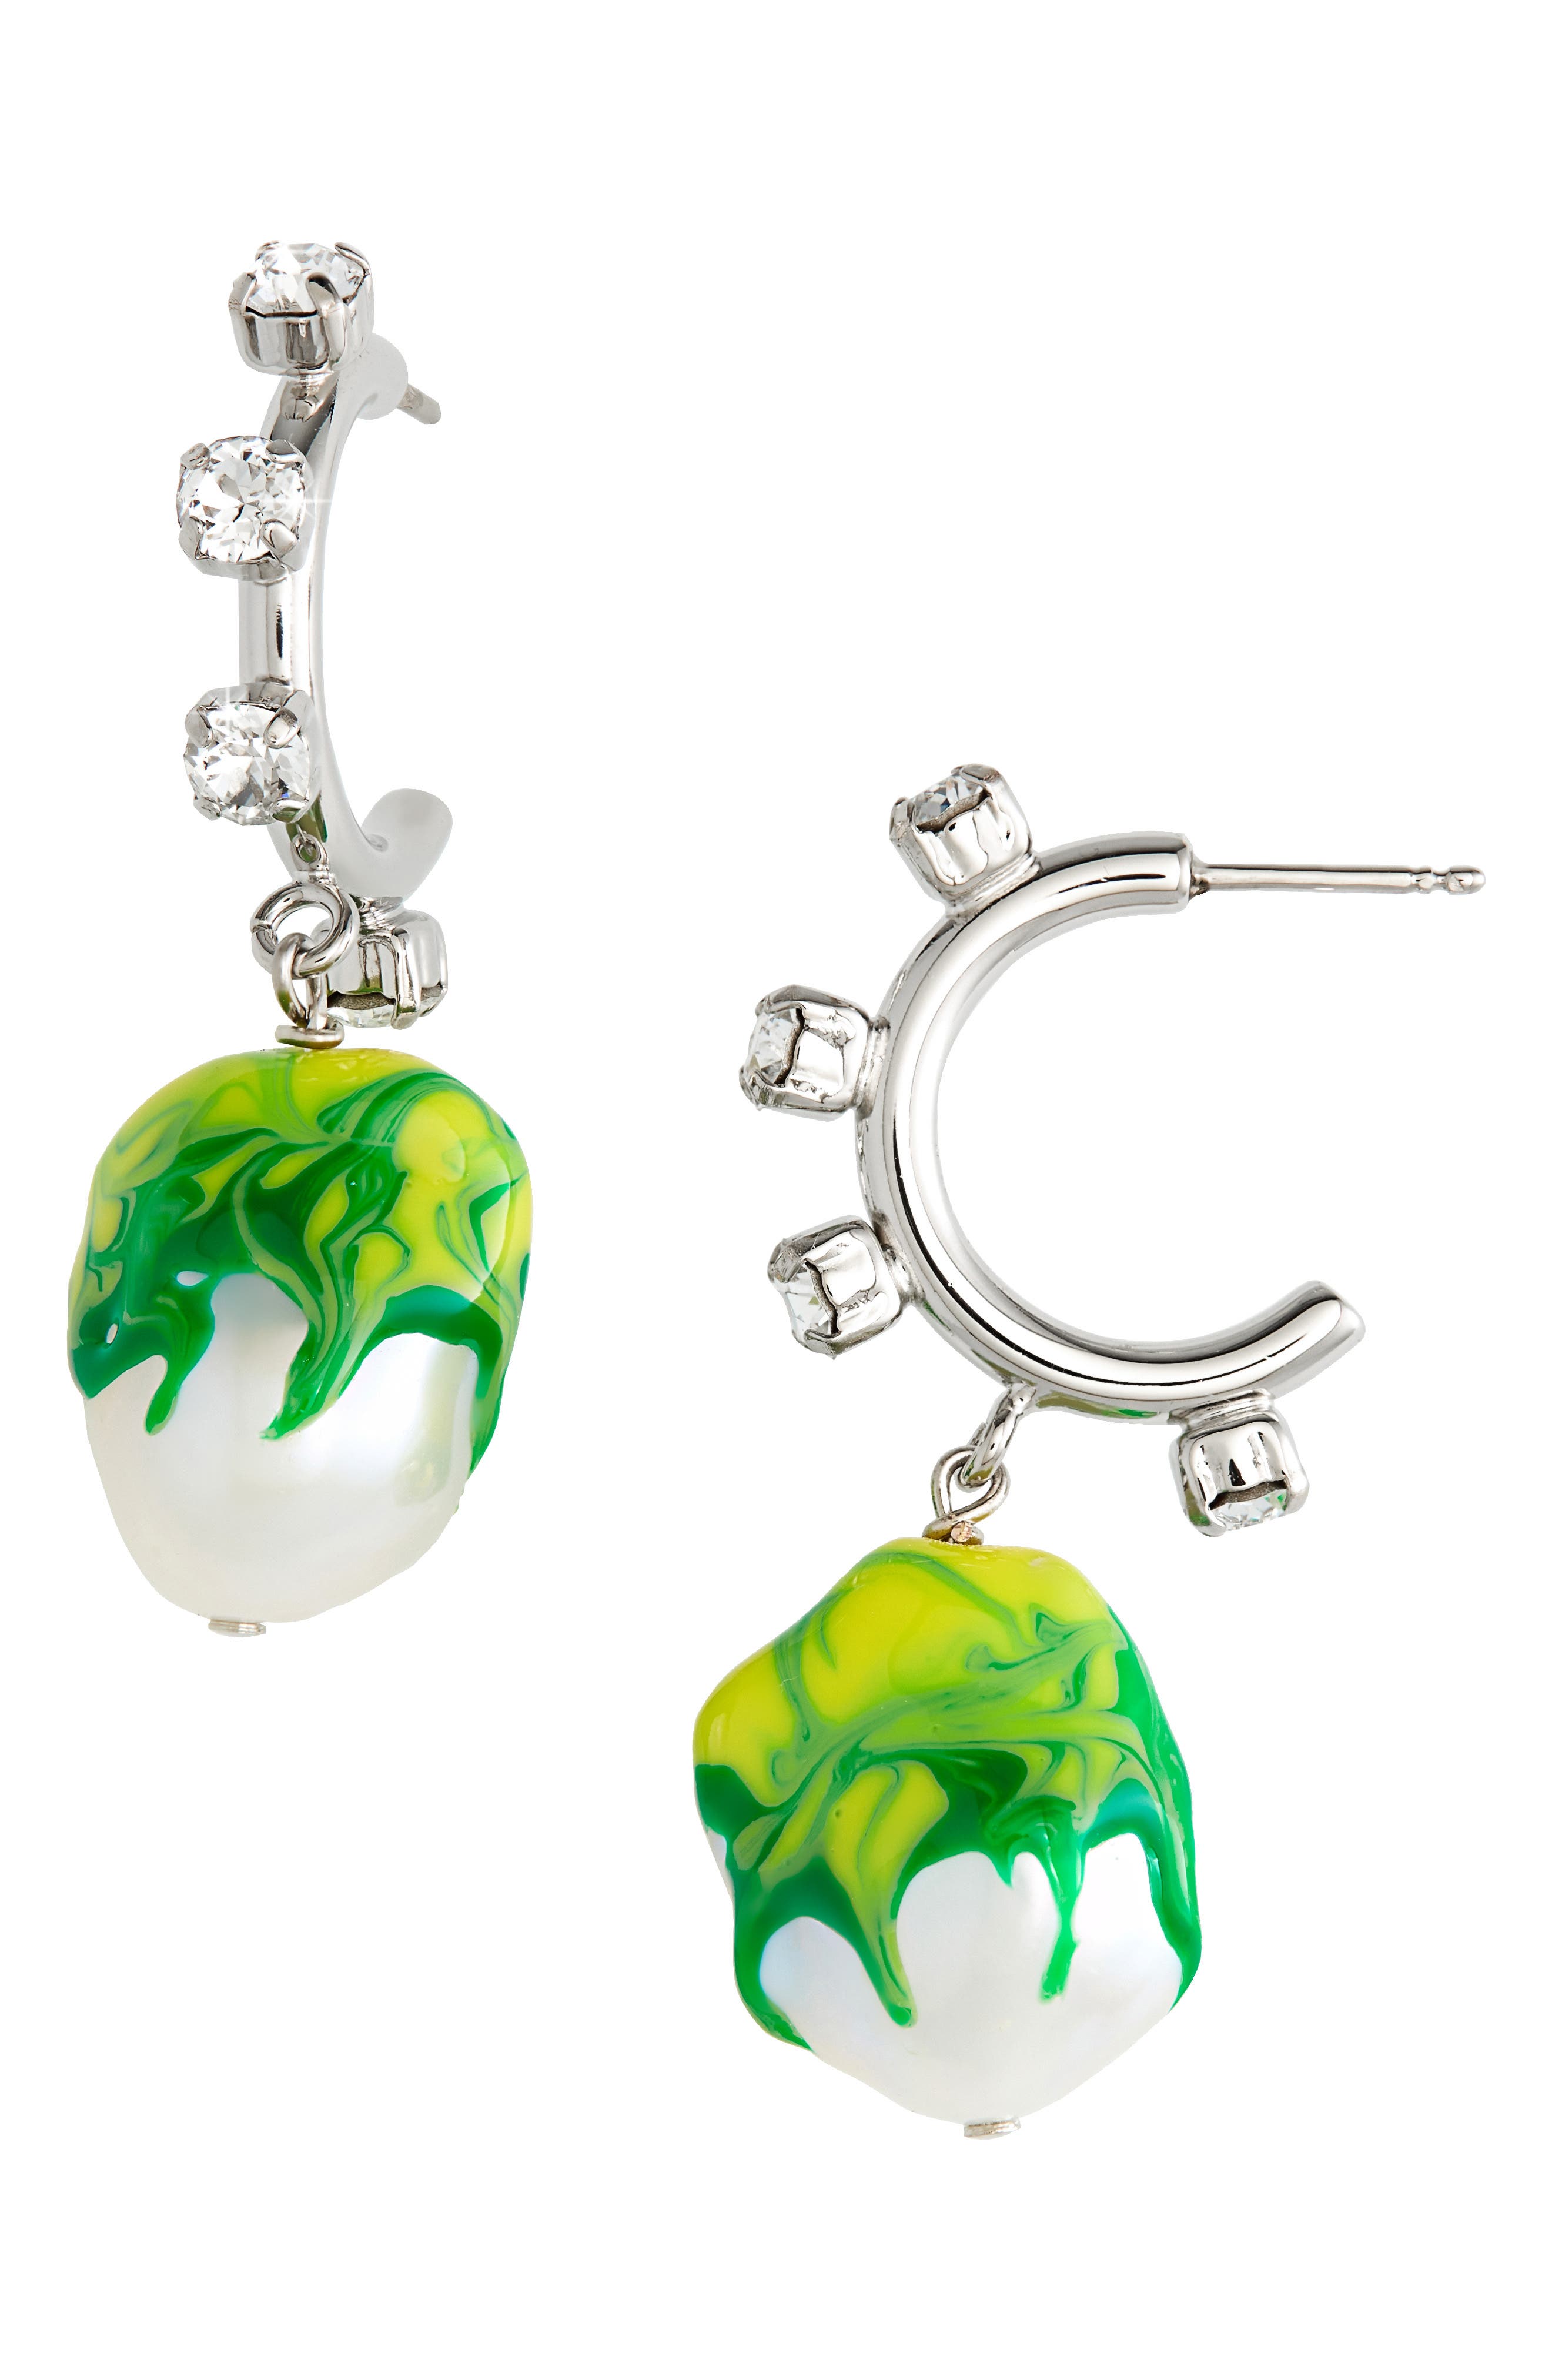 SafSafu Jelly Melted Pearl Earrings in Silver/Green